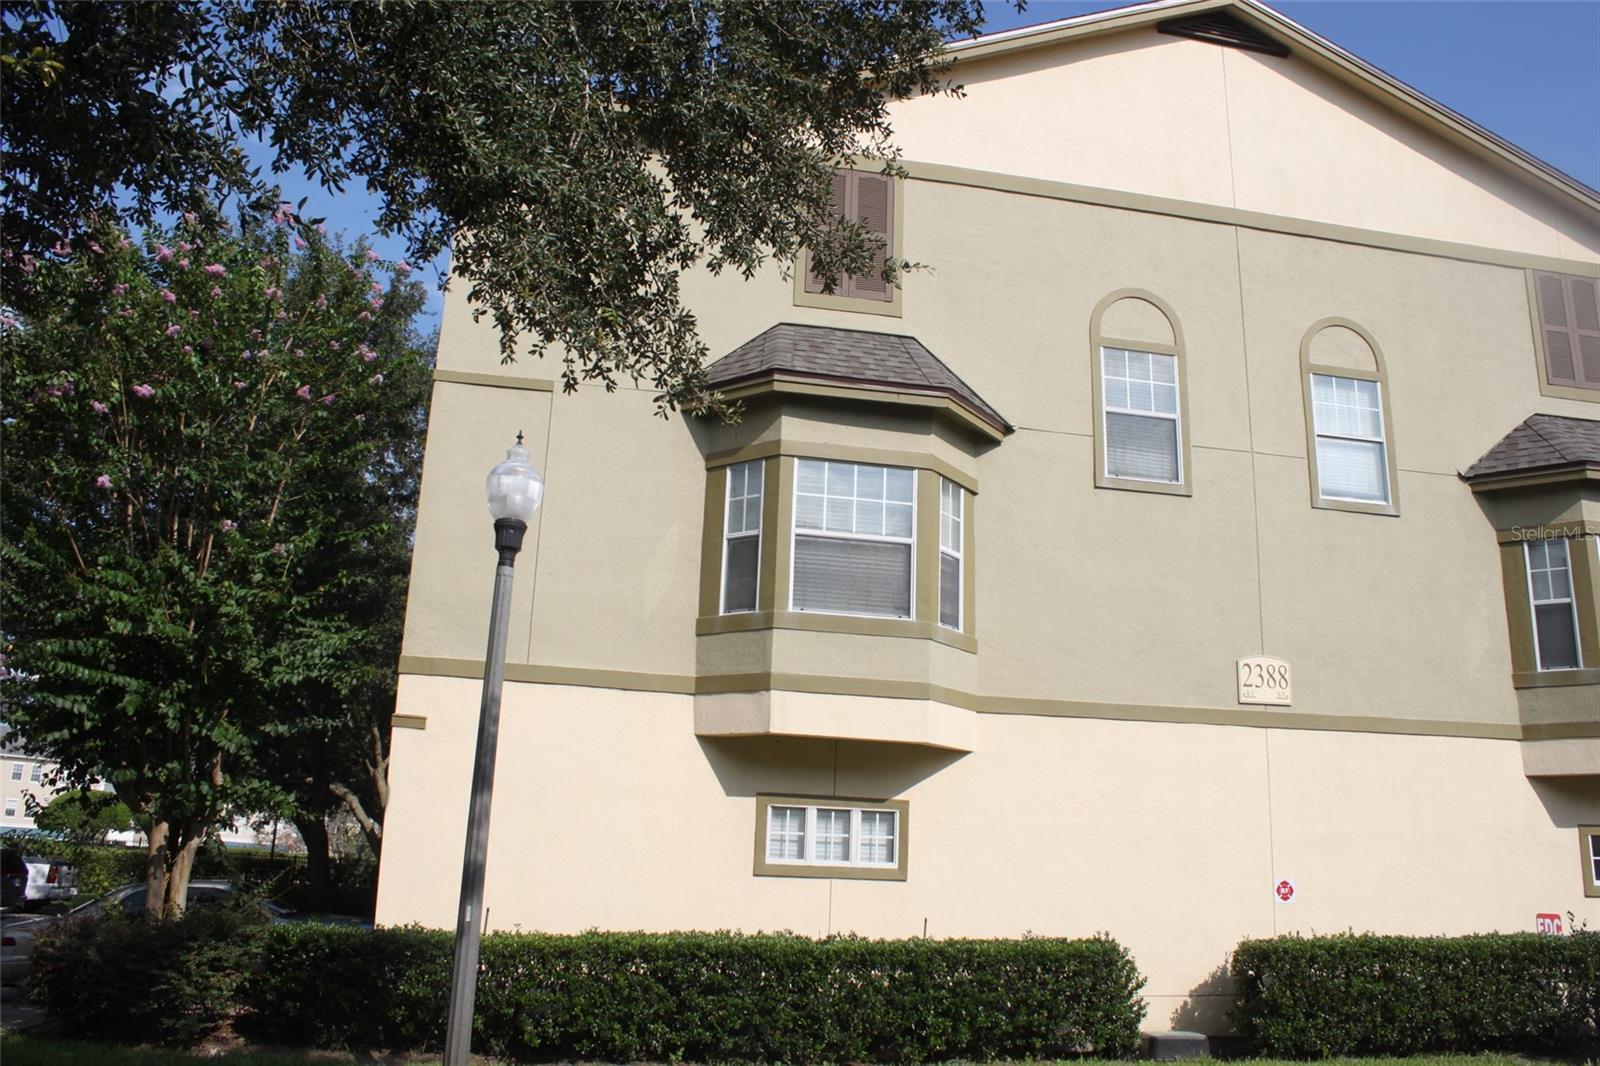 Photo of 2388 GRAND CENTRAL PARKWAY, ORLANDO, FL 32839